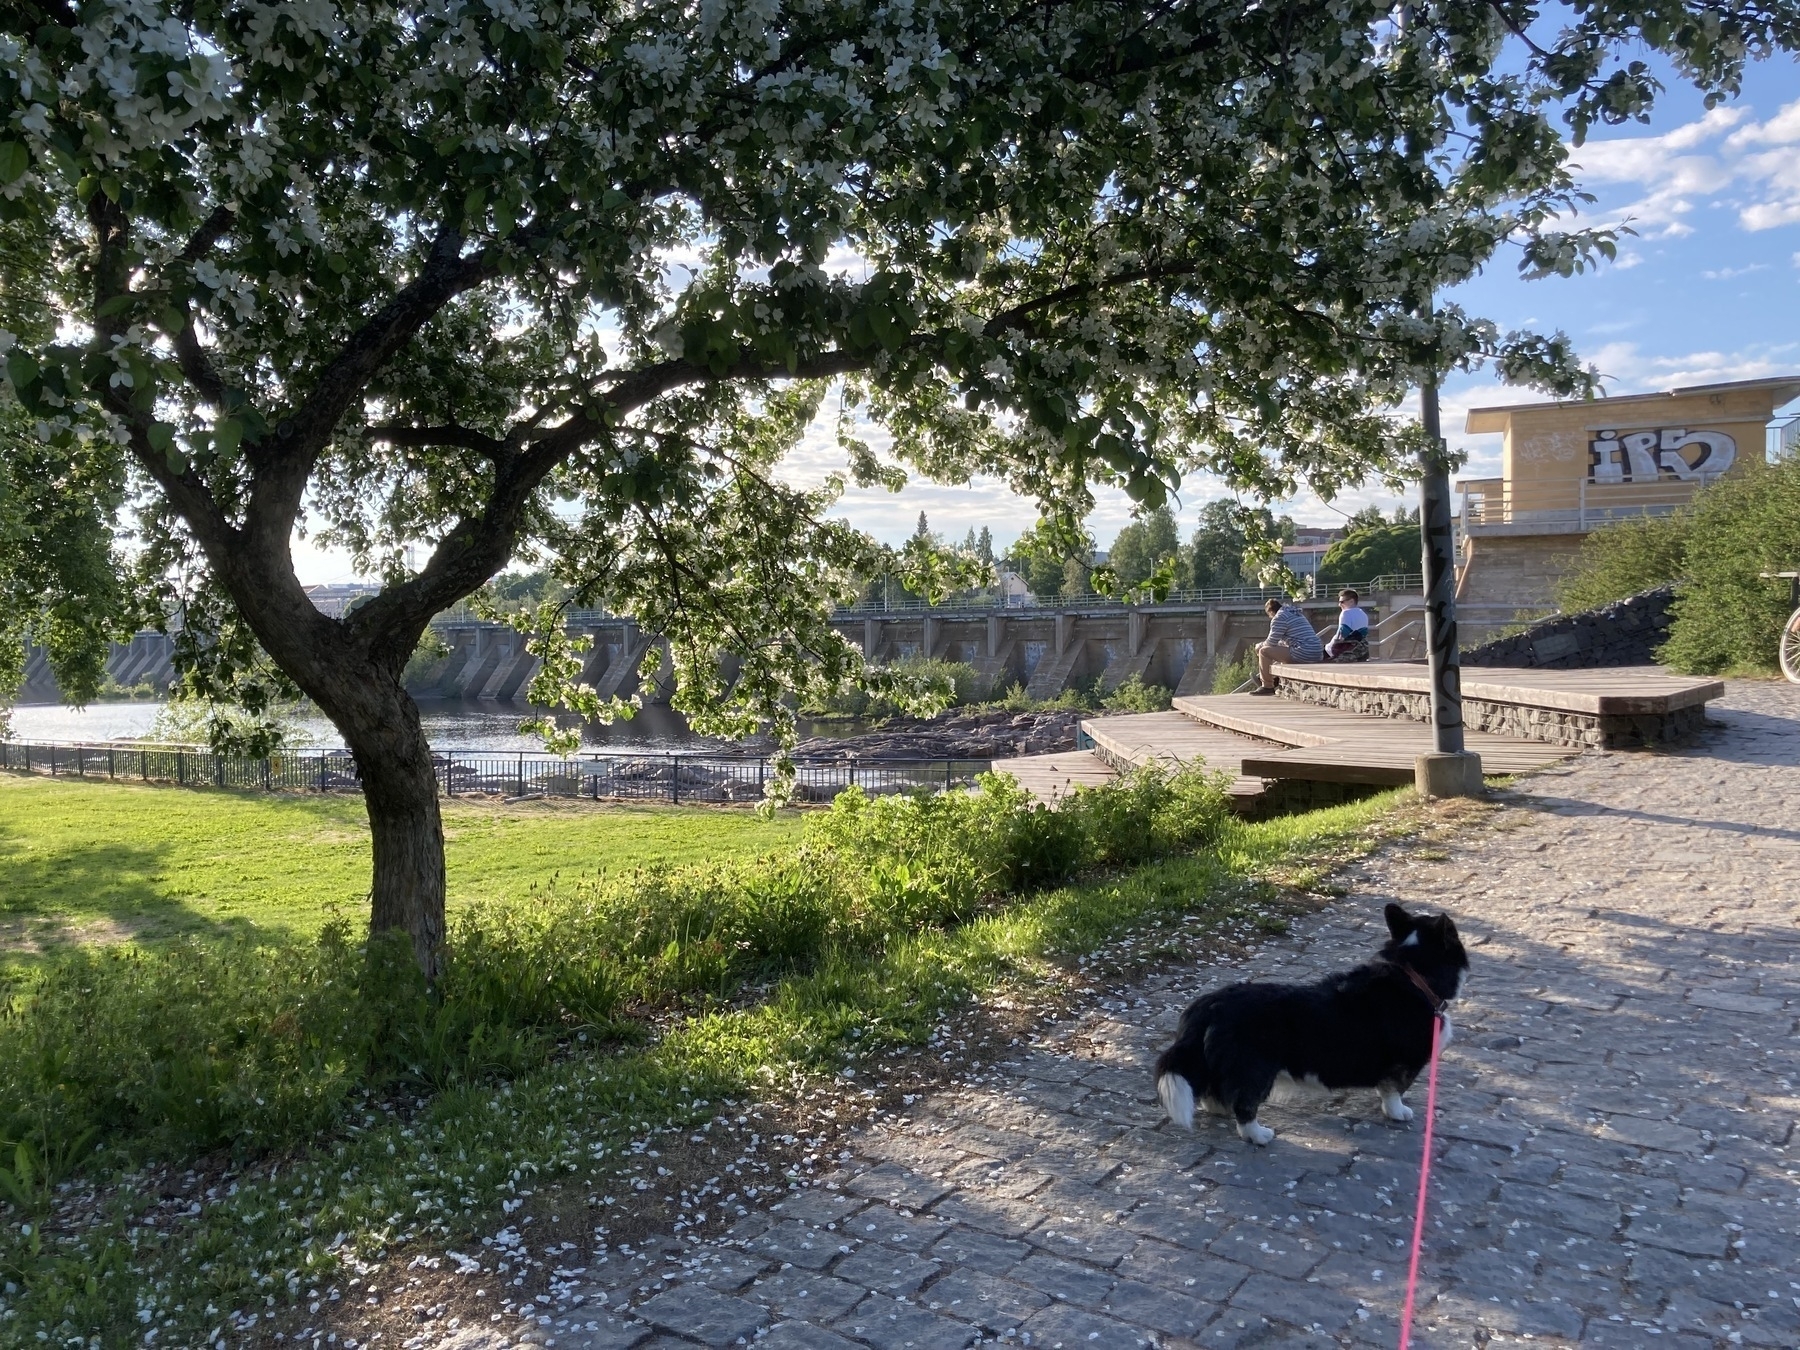 A scenic photo featuring Napu the dog, standing on a cobblestone path under a flowering tree, with the Merikoski hydroelectric power plant's dam visible in the background. The scene includes a grassy area and a bench where two people are seated, enjoying the serene environment. The dam and surrounding nature are bathed in warm, late afternoon sunlight.